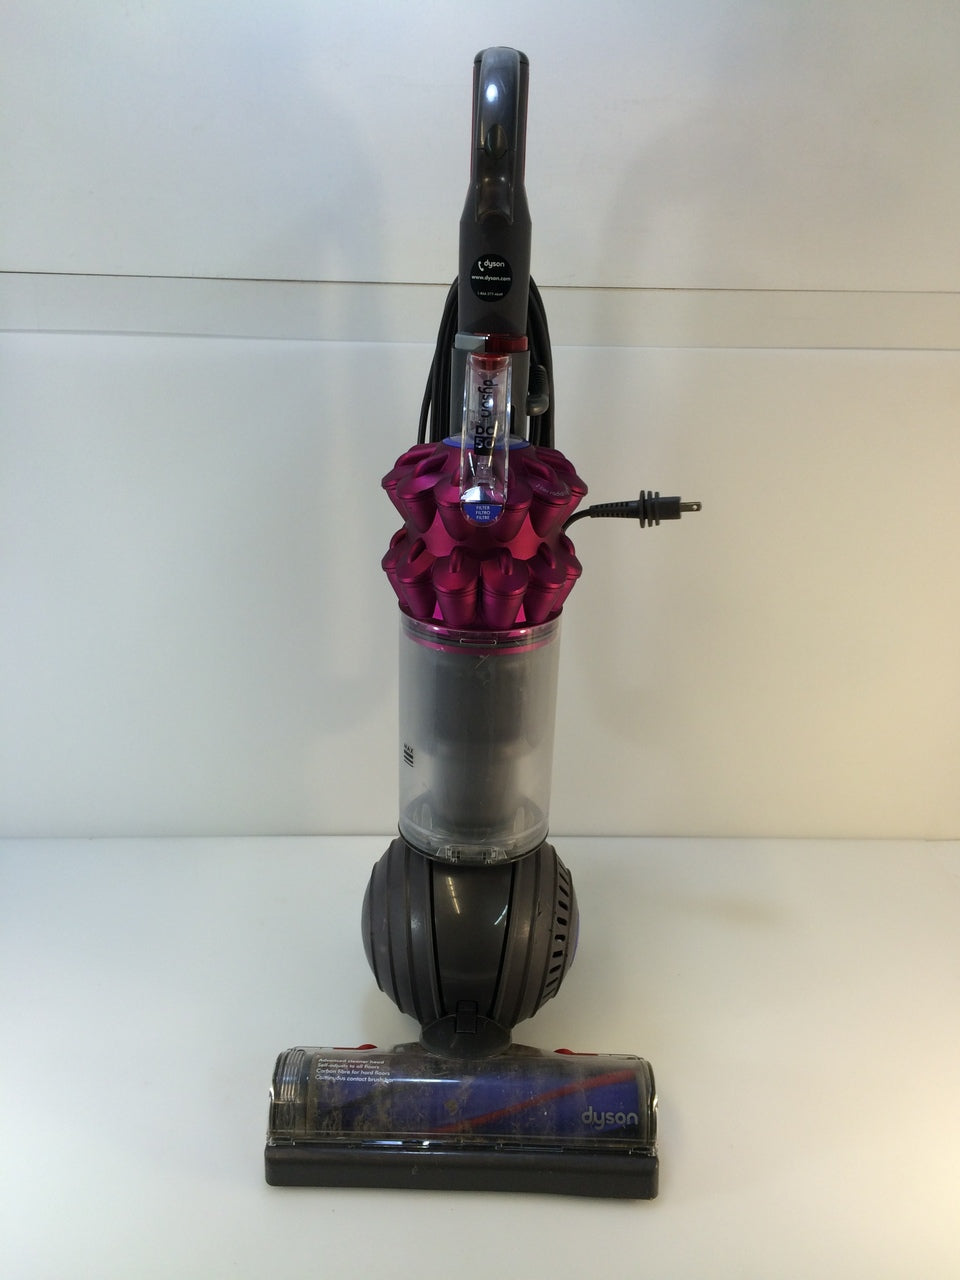 Dyson DC50 Ball Multi Floor Compact Upright Vacuum Cleaner